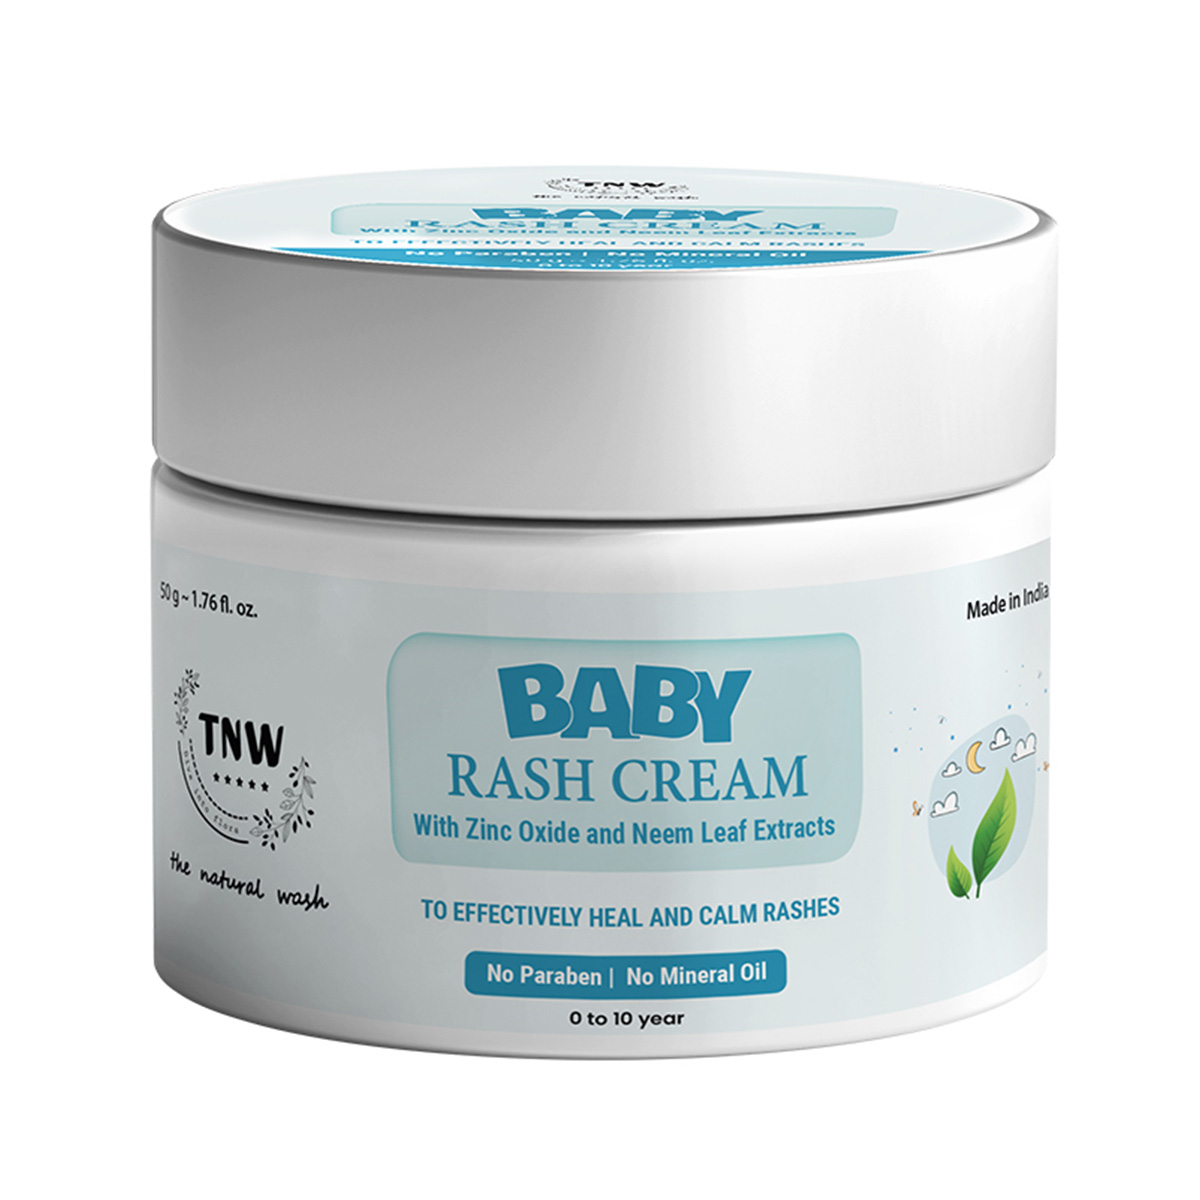 TNW - The Natural Wash Baby Rash Cream With Zinc Oxide & Neem Leaf Extracts, 50gm